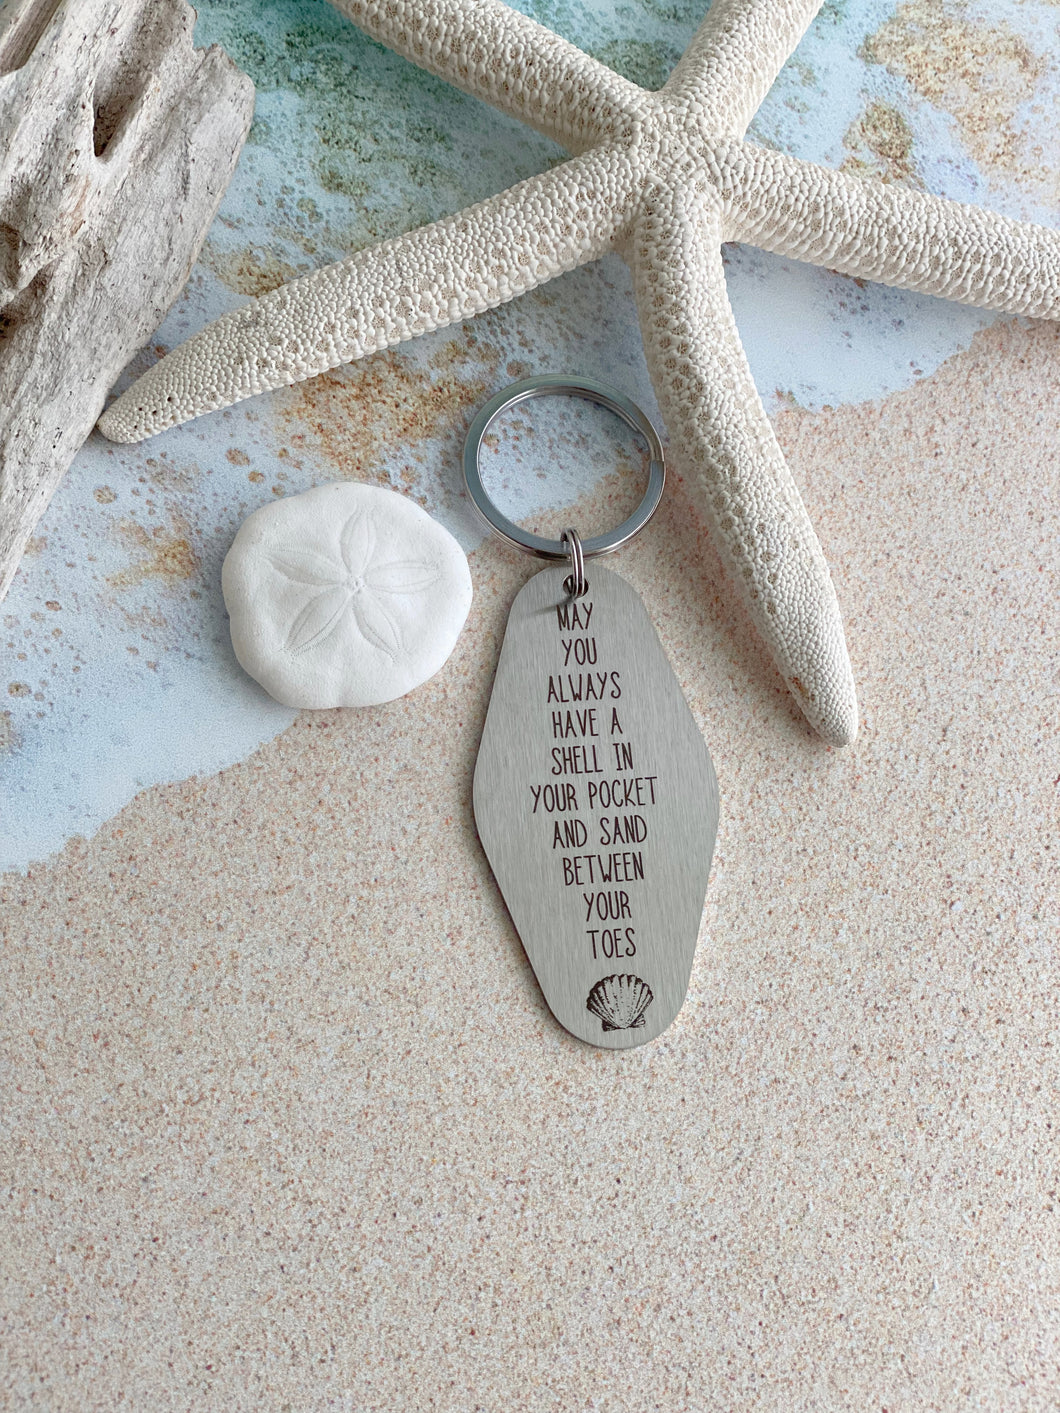 May you always have a shell in your pocket and sand between your toes - motel keychain